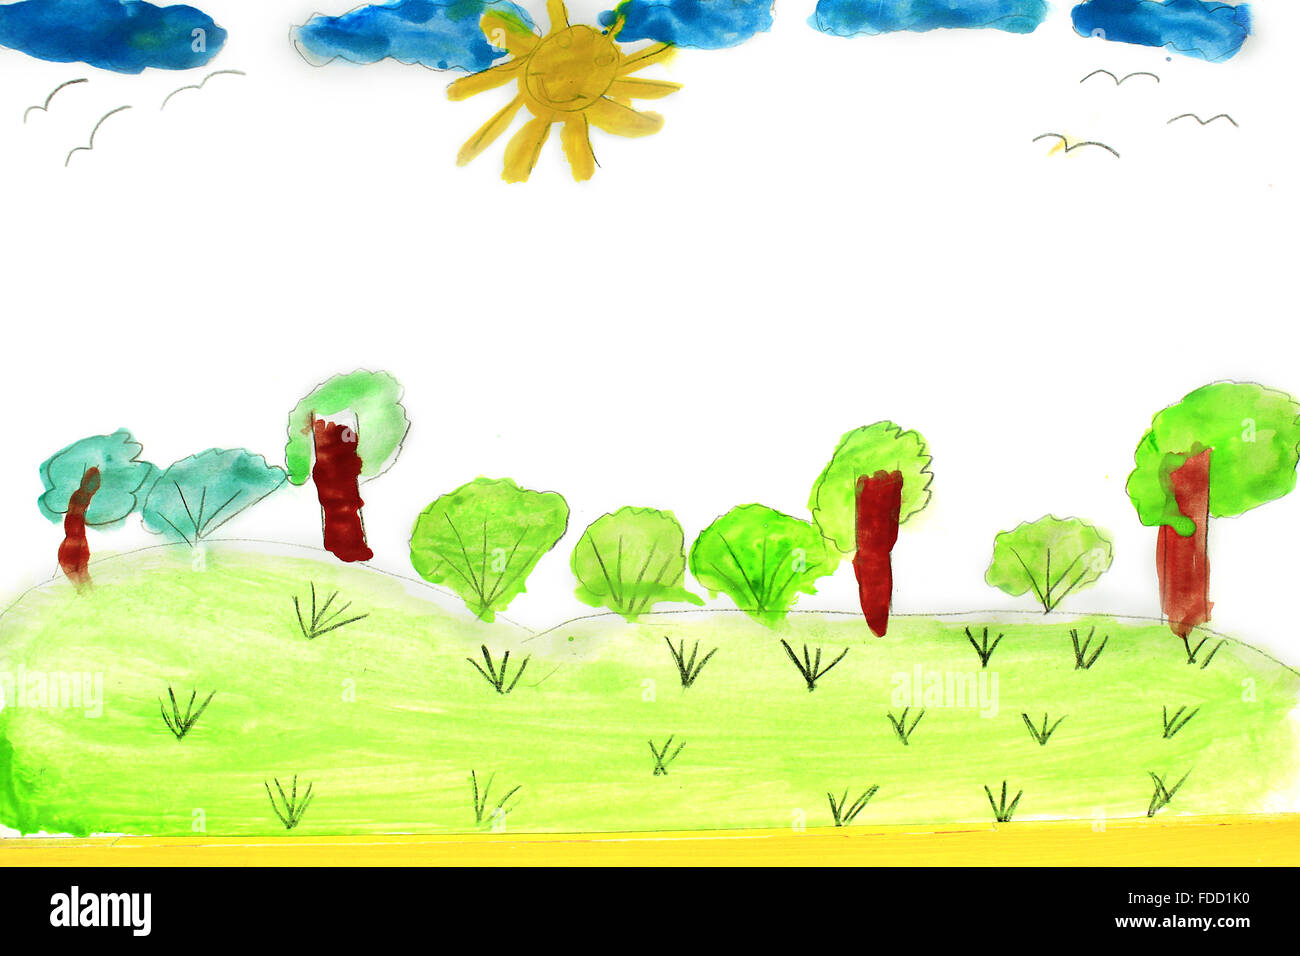 joy childish drawing of summer with trees and bush Stock Photo